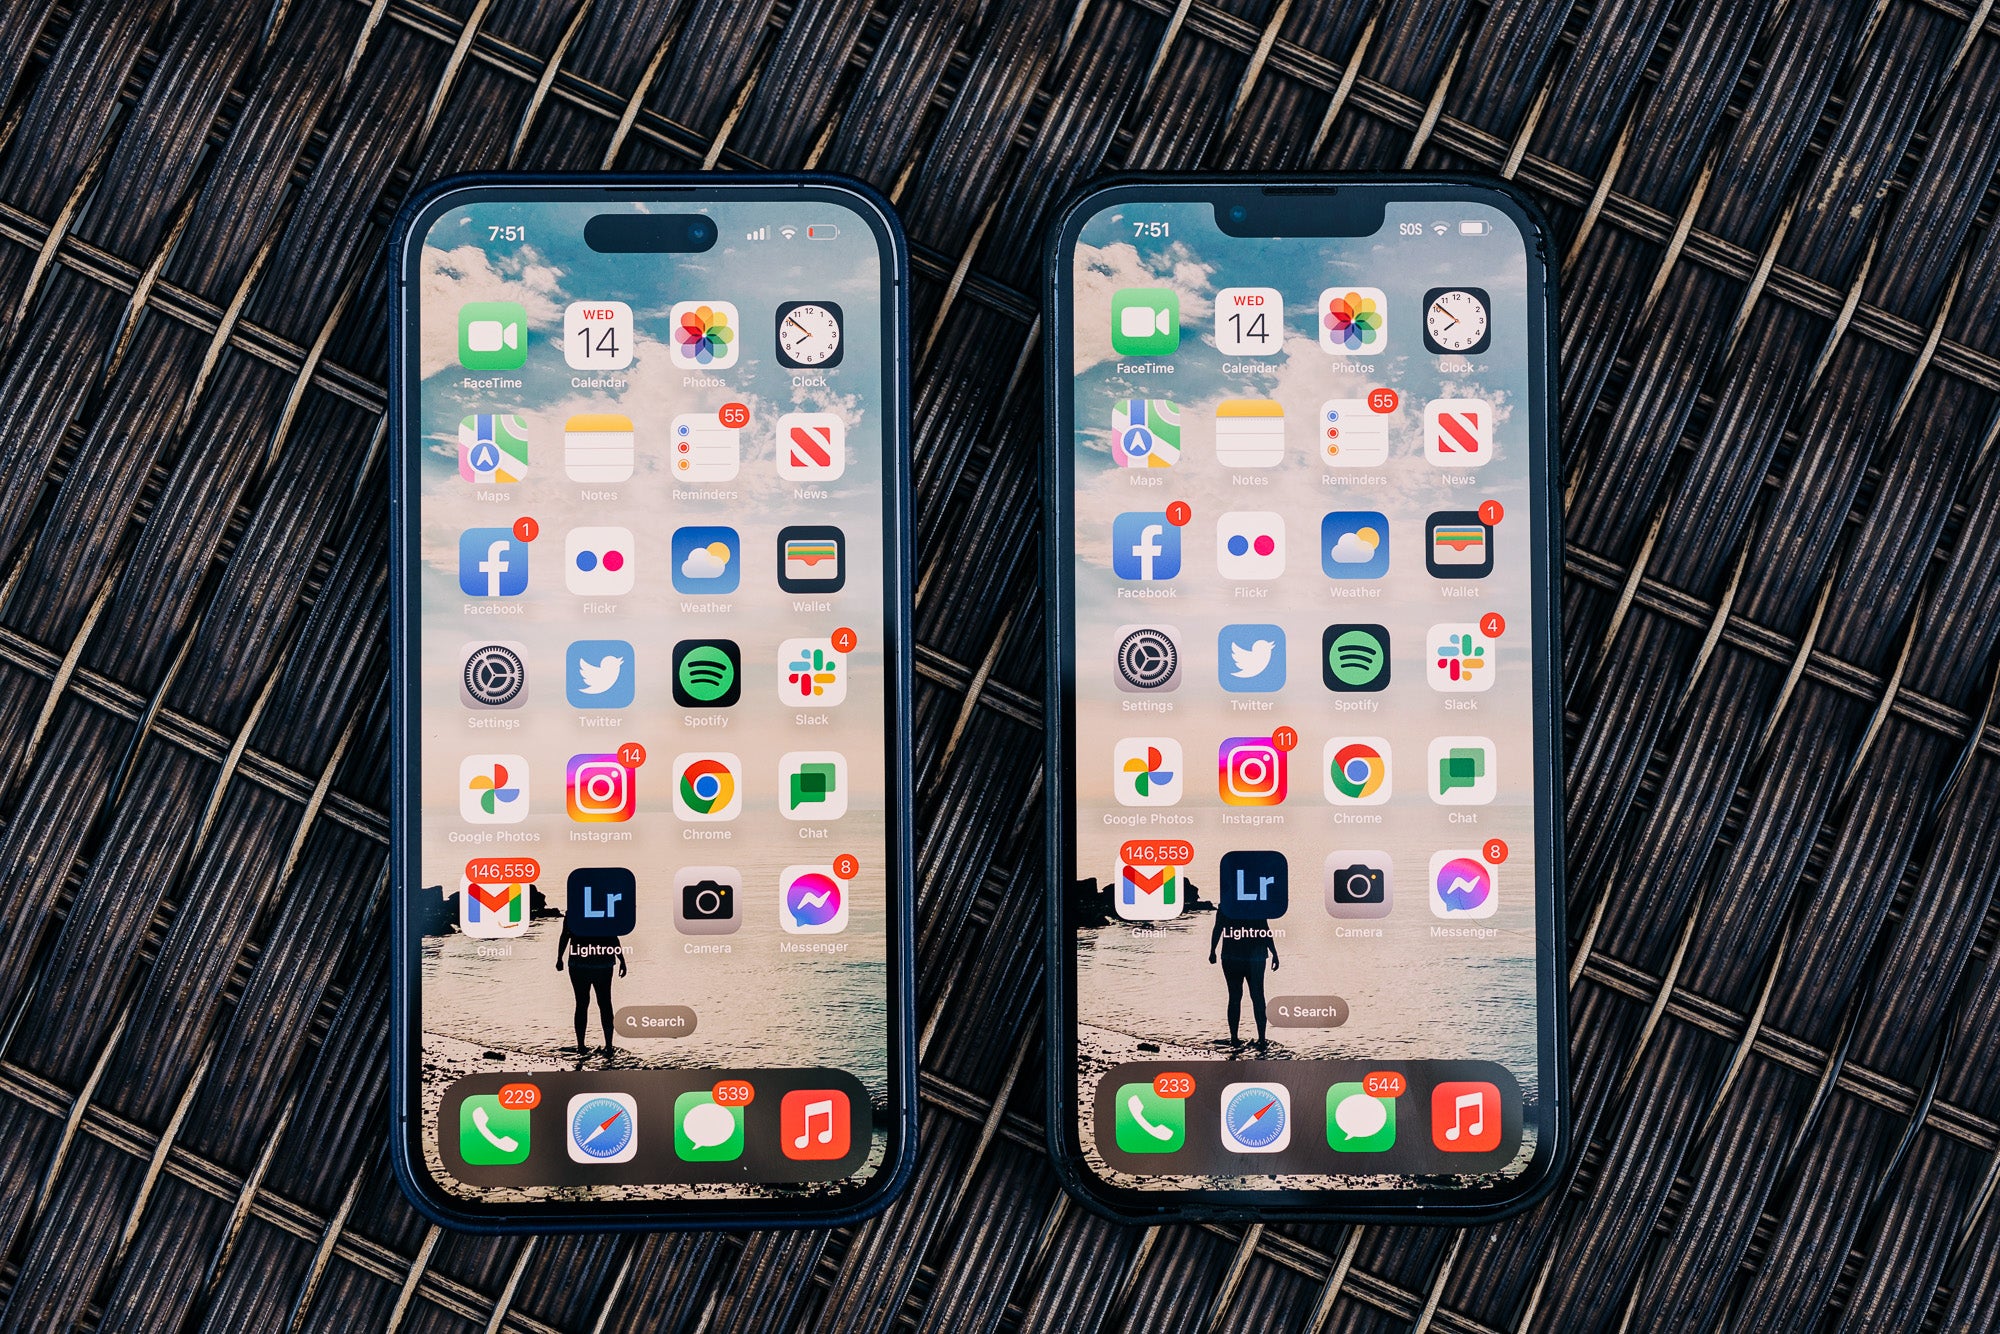 The iPhone 14 Pro Max and iPhone 13 Pro Max brightness comparison